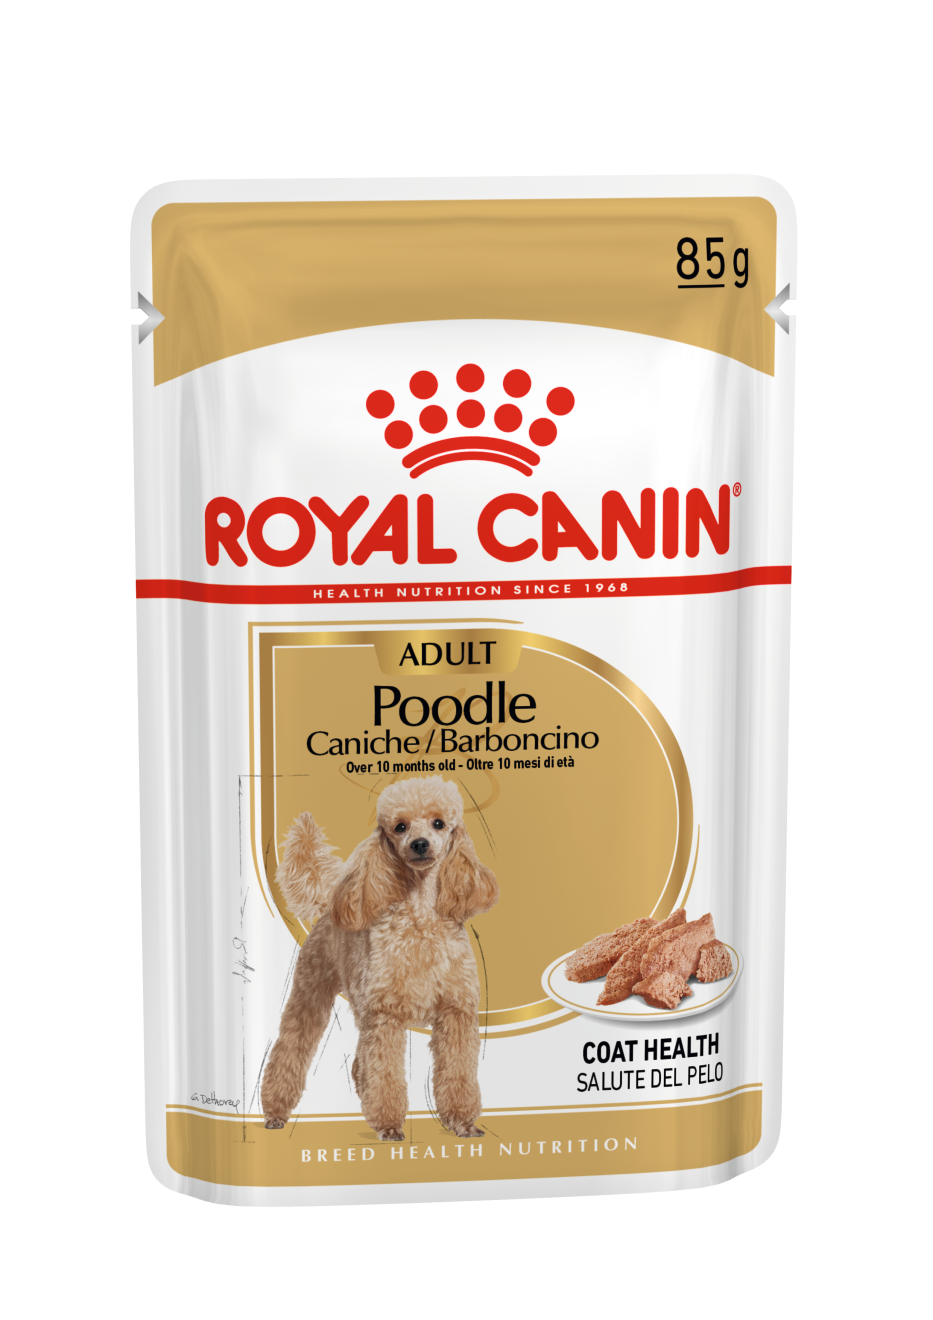 ROYAL CANIN Poodle Adult Wet Dog Food Pouches